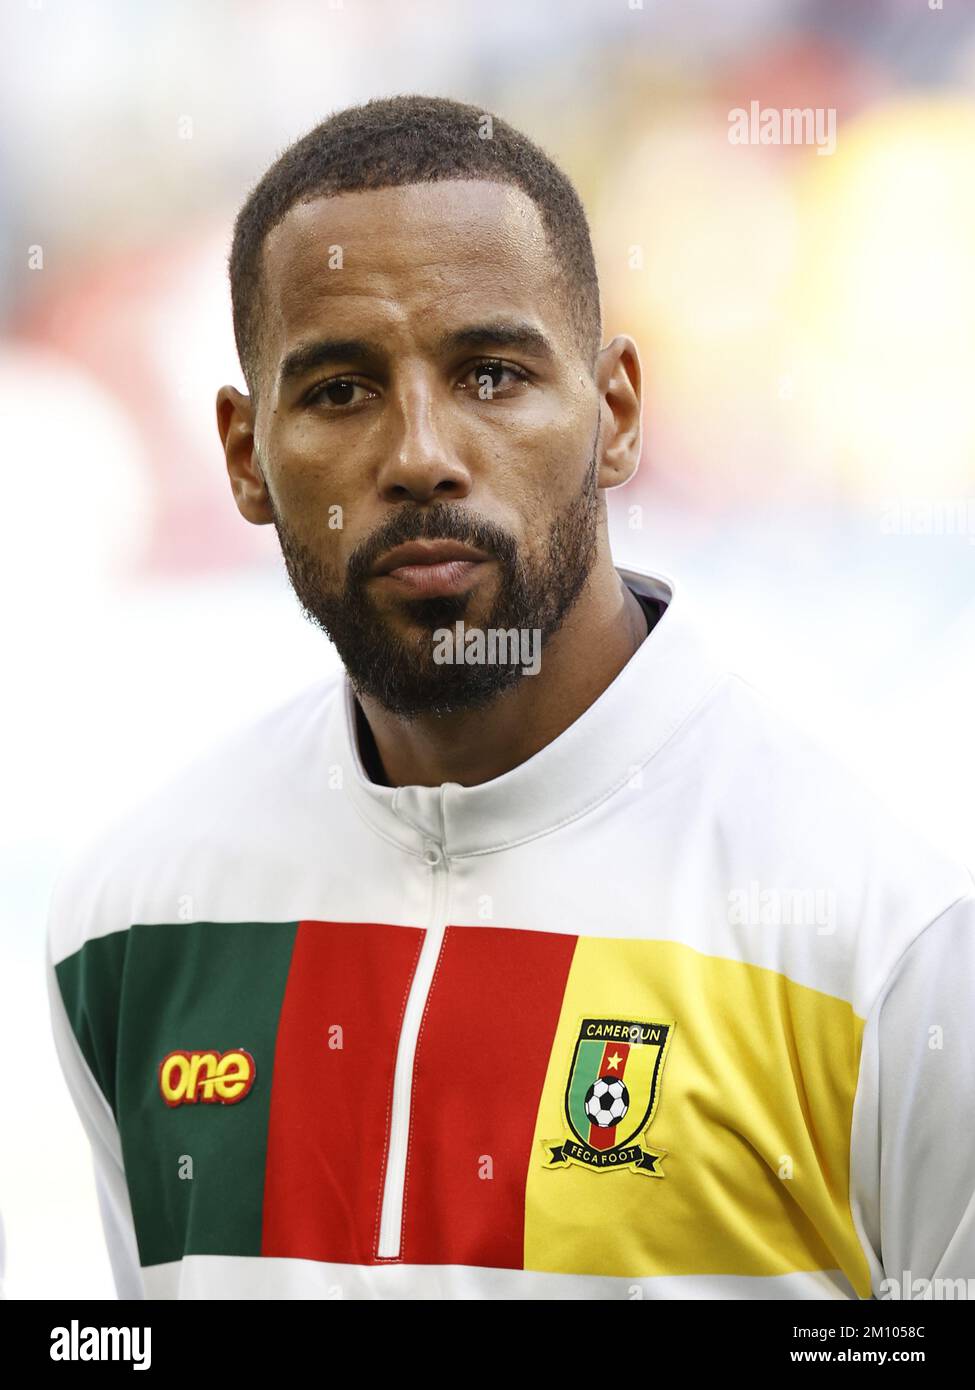 AL WAKRAH - Cameroon goalkeeper Devis Epassy during the FIFA World Cup Qatar 2022 group G match between Cameroon and Serbia at Al Janoub Stadium on November 28, 2022 in Al Wakrah, Qatar. AP | Dutch Height | MAURICE OF STONE Stock Photo